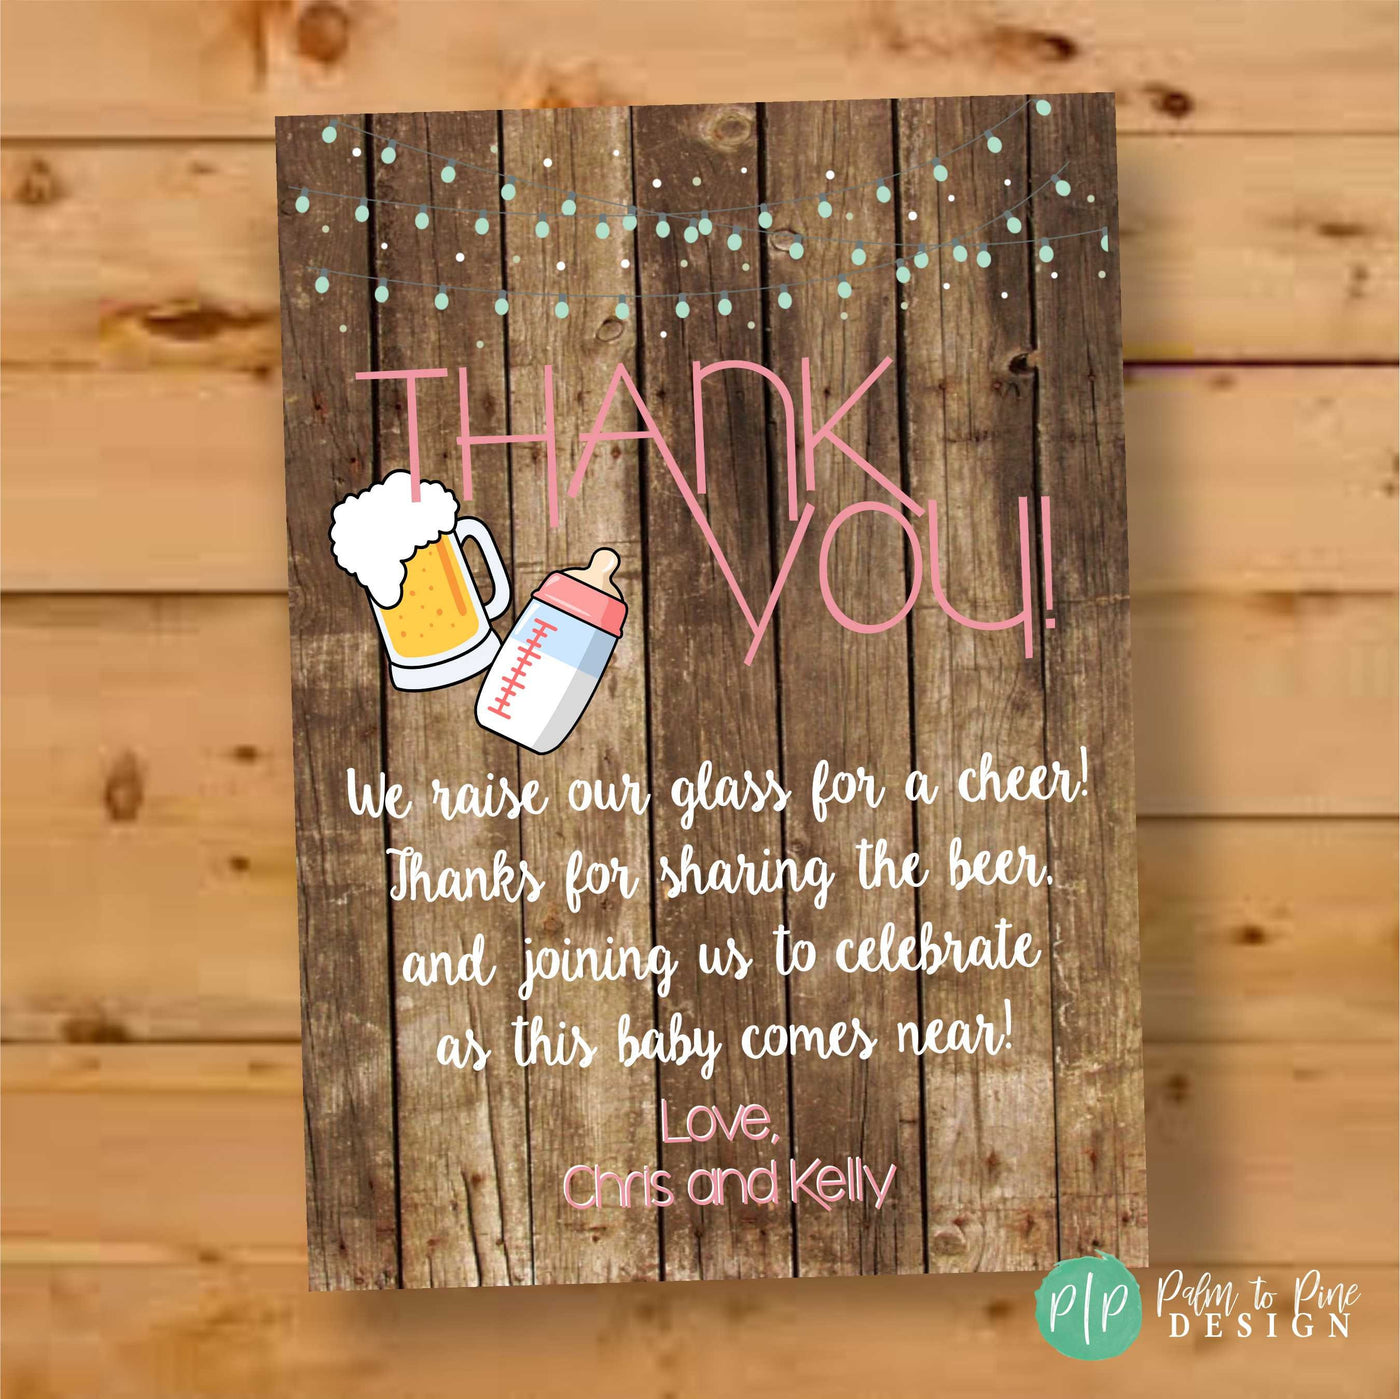 A Baby is Brewing Thank You Card, Beer Baby Shower Thank You, Baby Shower Thank You, Baby Shower BBQ Thank You Card, Rustic Thank You Card